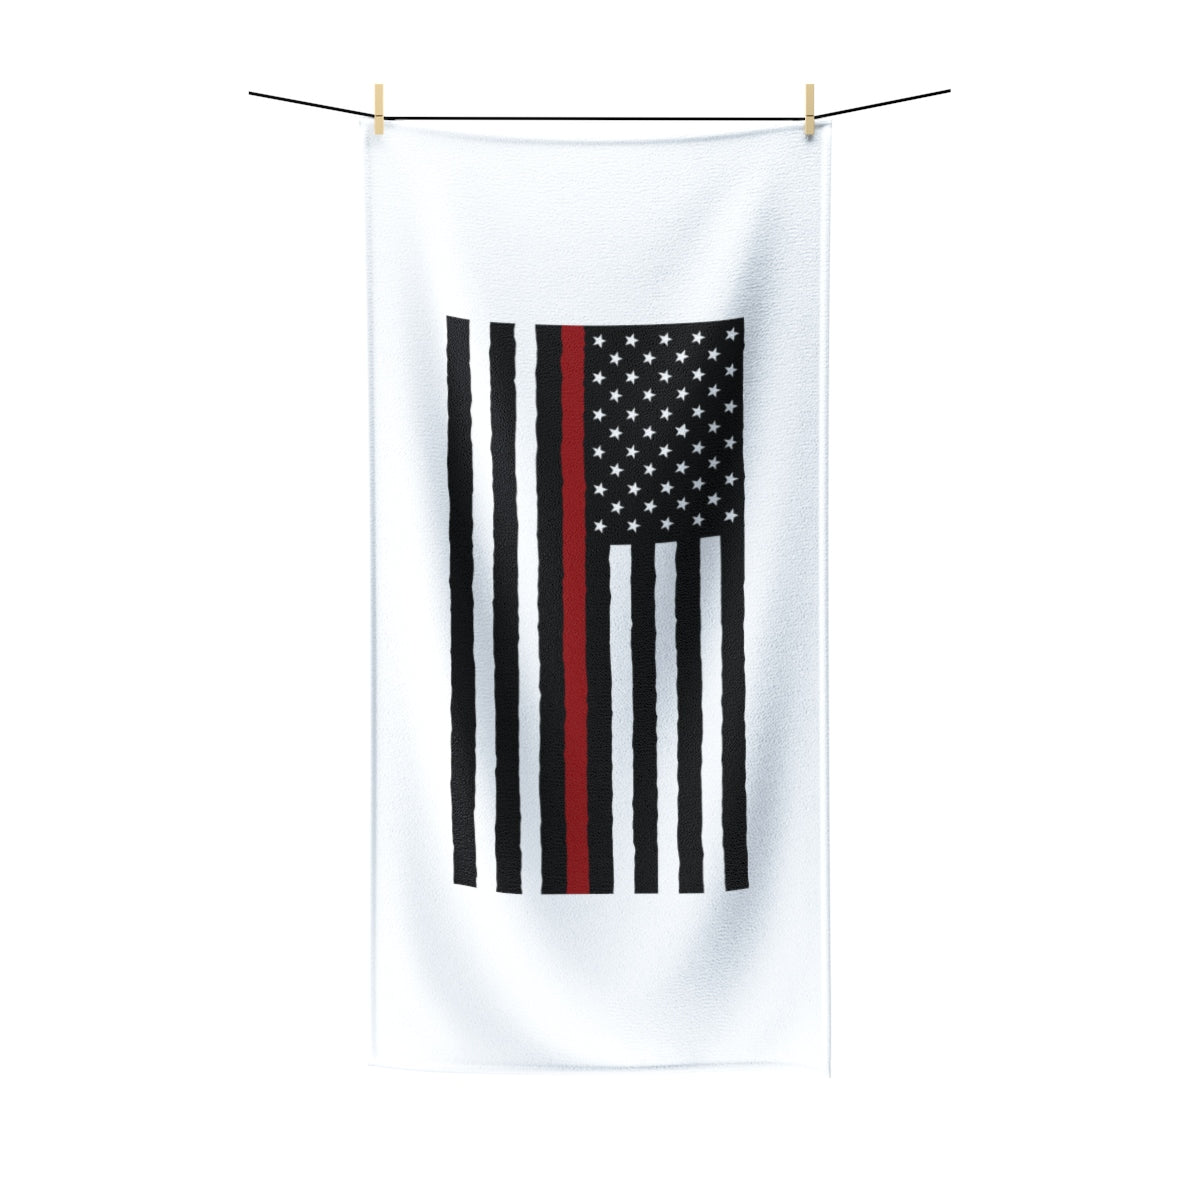 Firefighter Thin Red Line Polycotton Towel - firestationstore.com - Home Decor